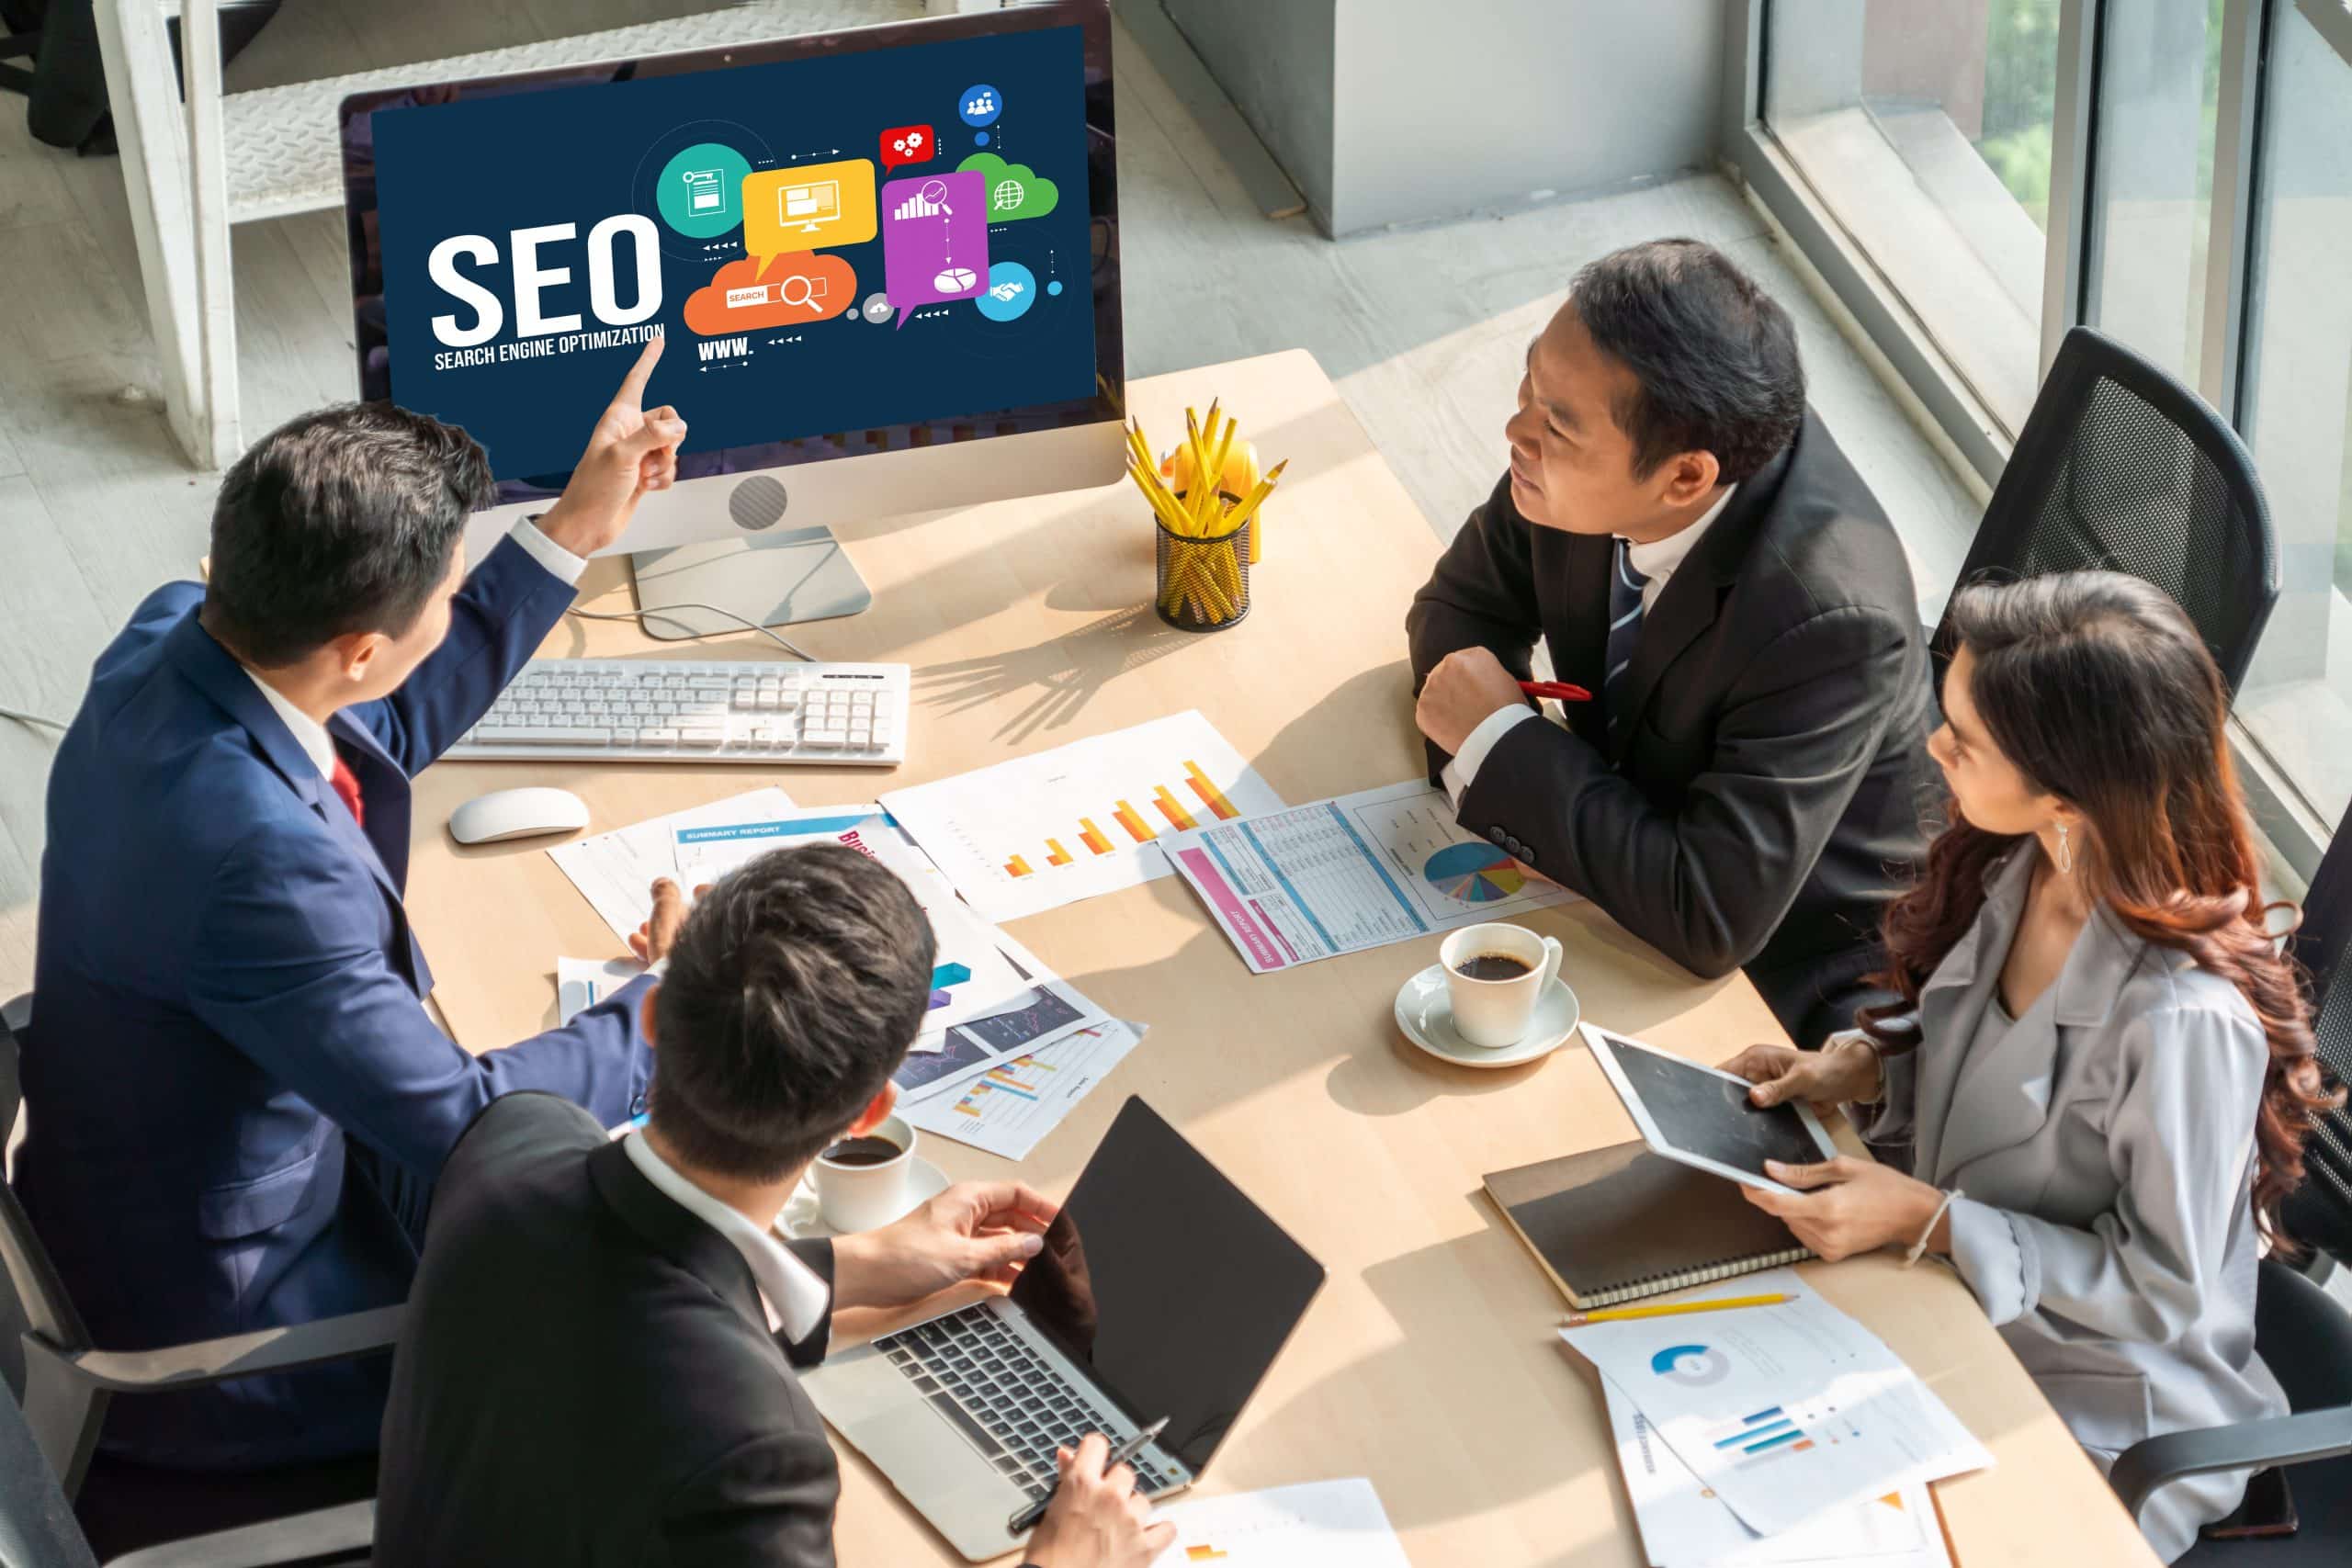 Search Engine Optimization (SEO) for targeted audience.